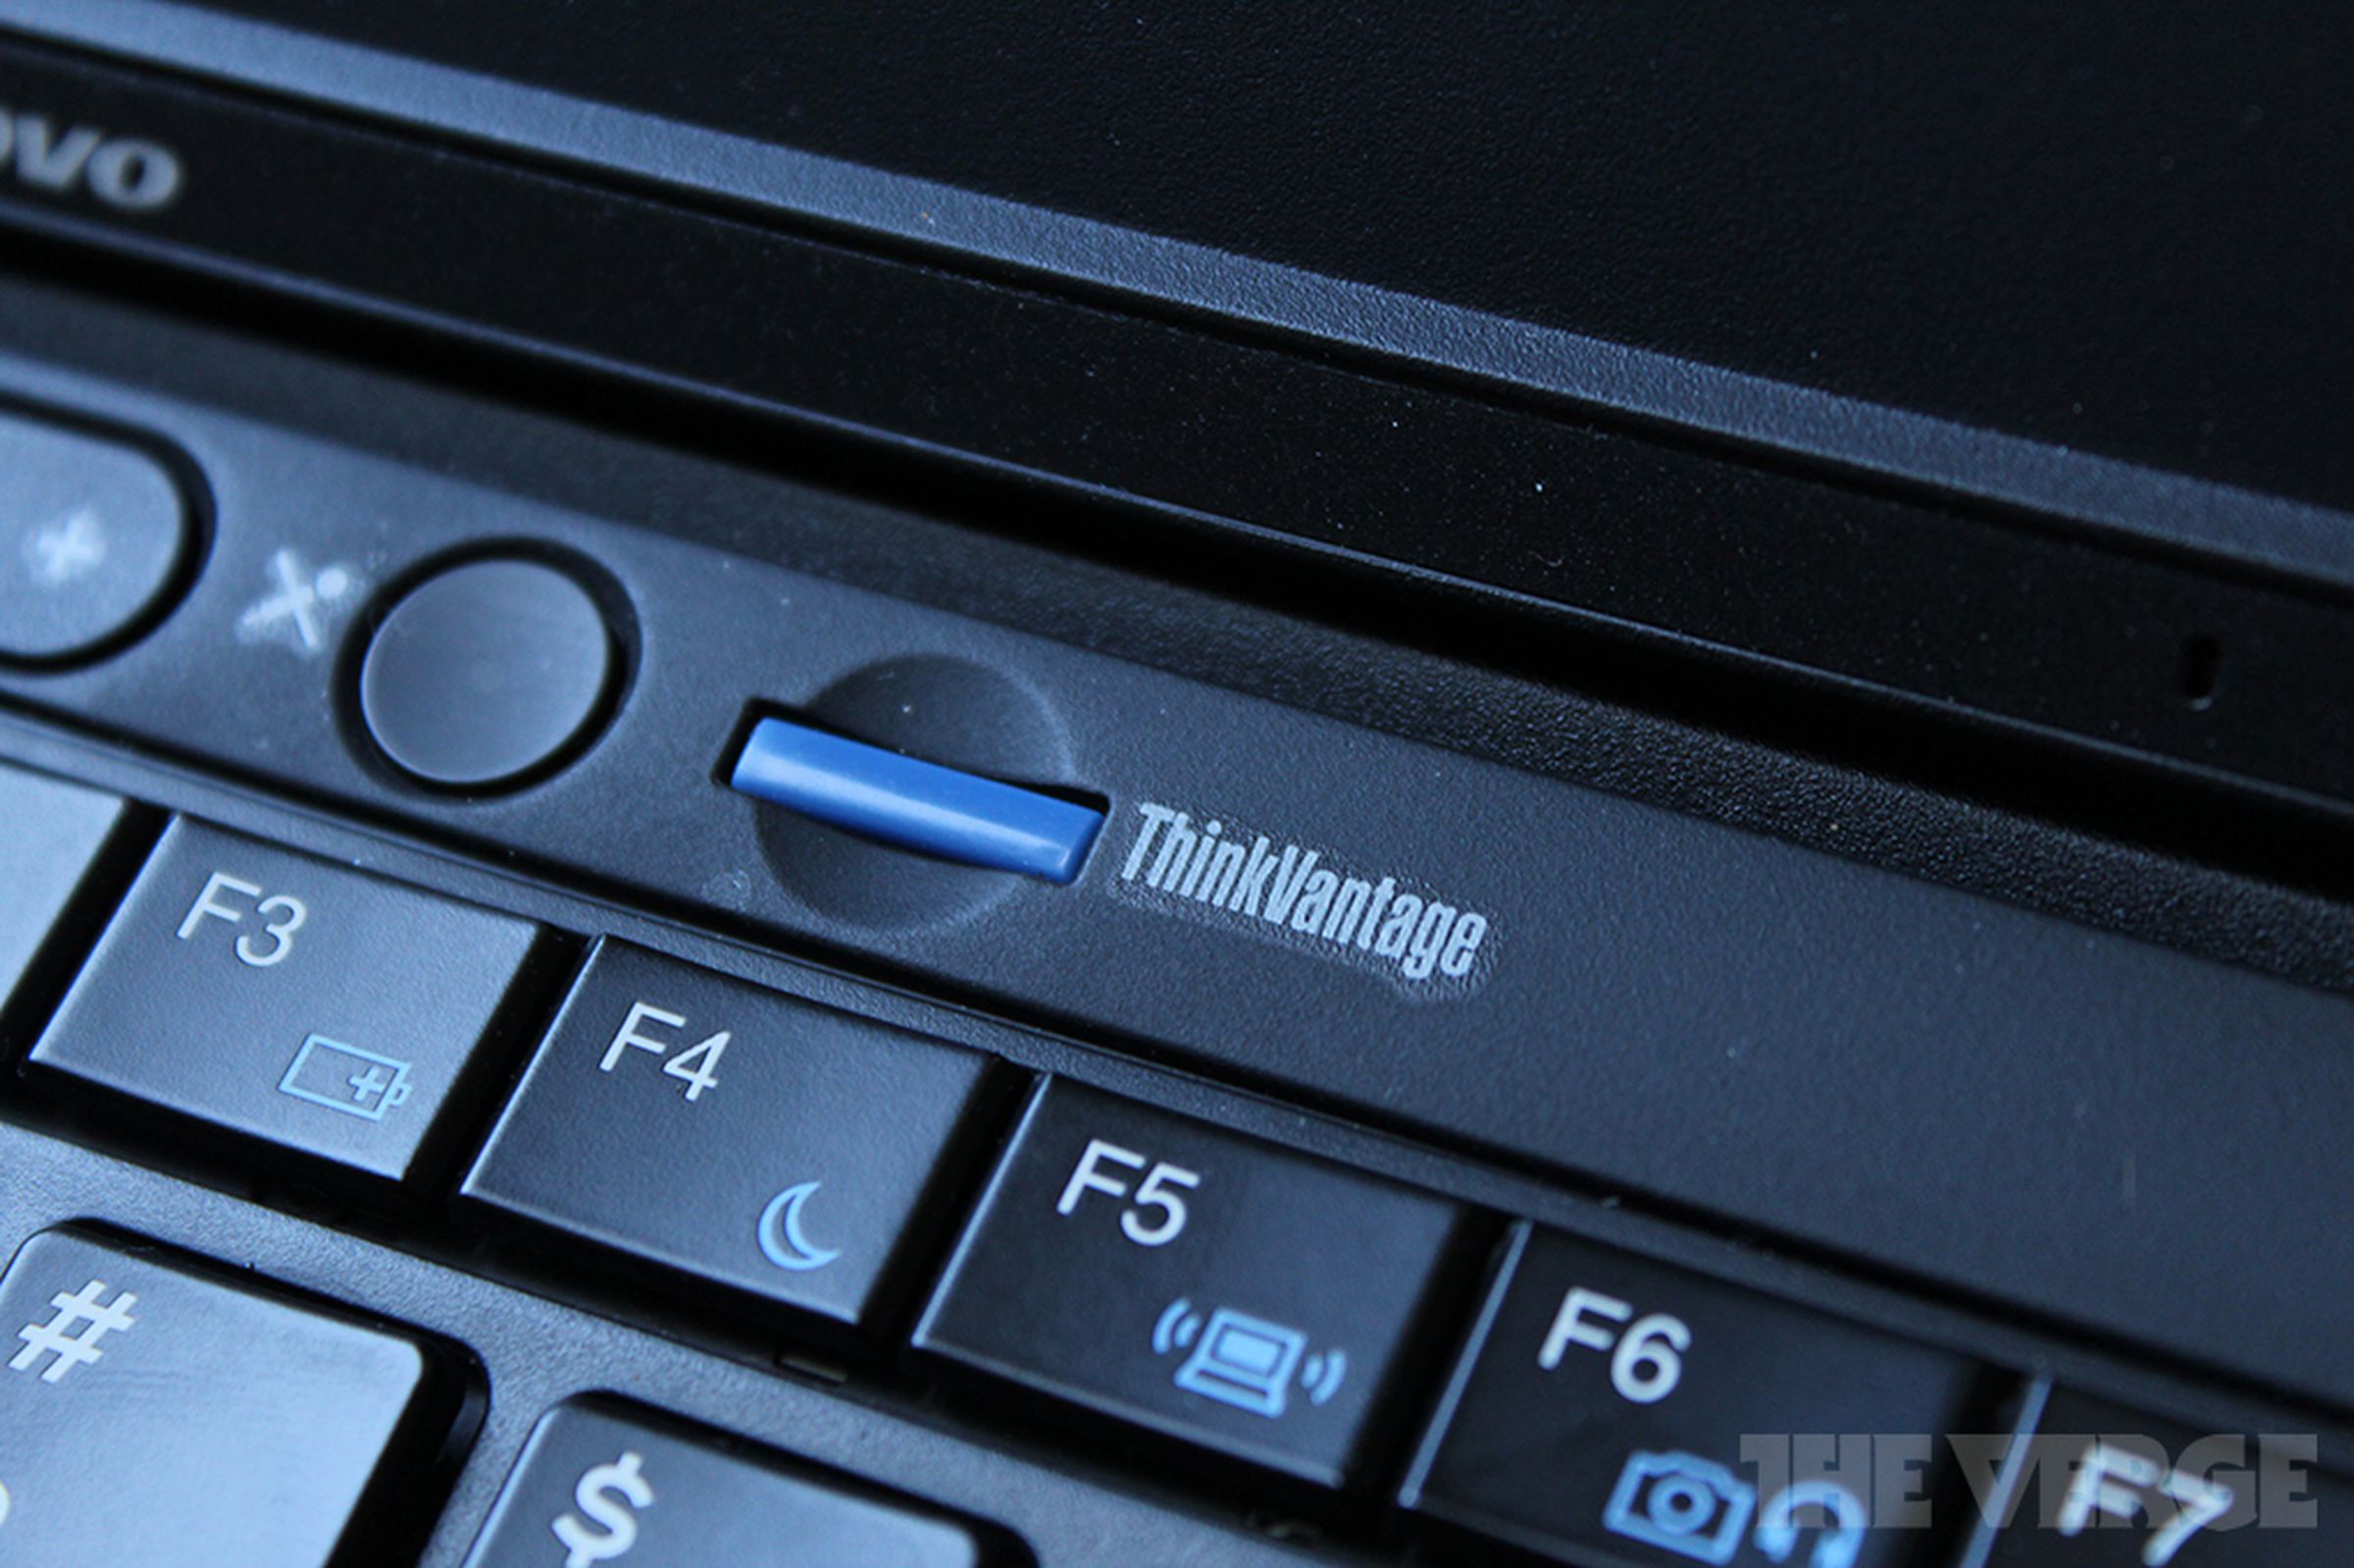 Lenovo ThinkPad X230 review pictures